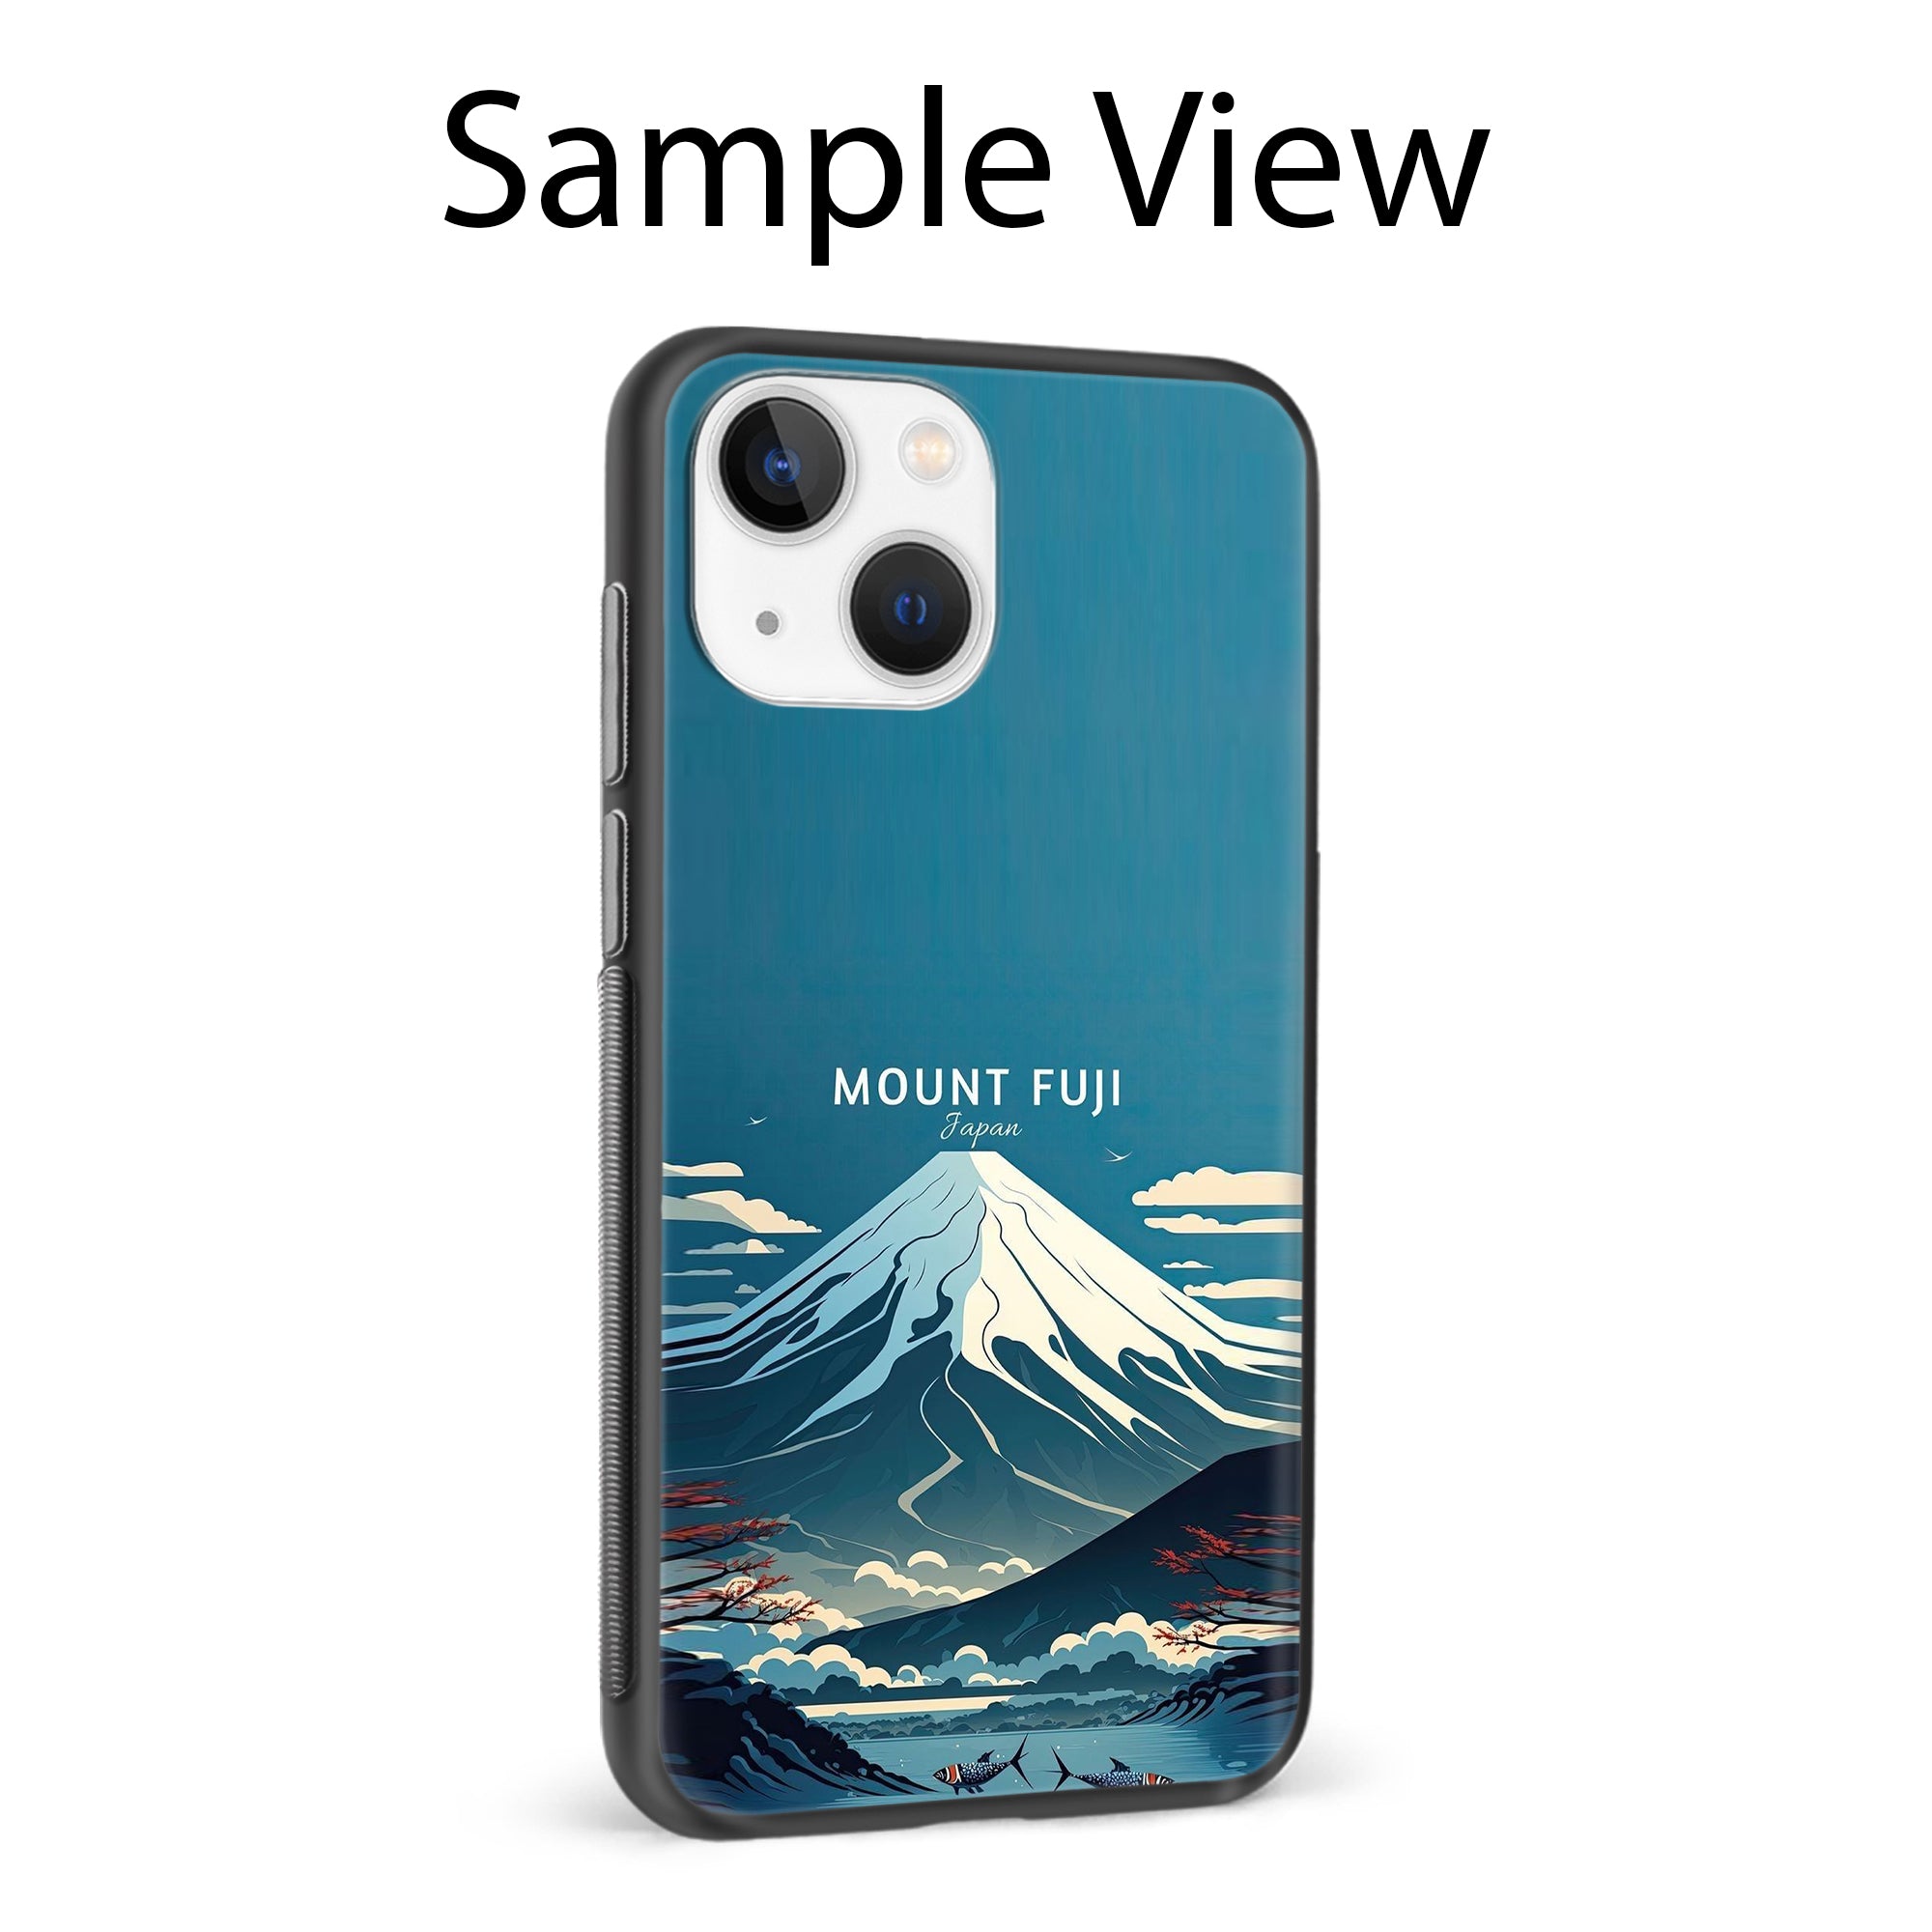 Buy Mount Fuji Metal-Silicon Back Mobile Phone Case/Cover For Samsung Galaxy A50 / A50s / A30s Online